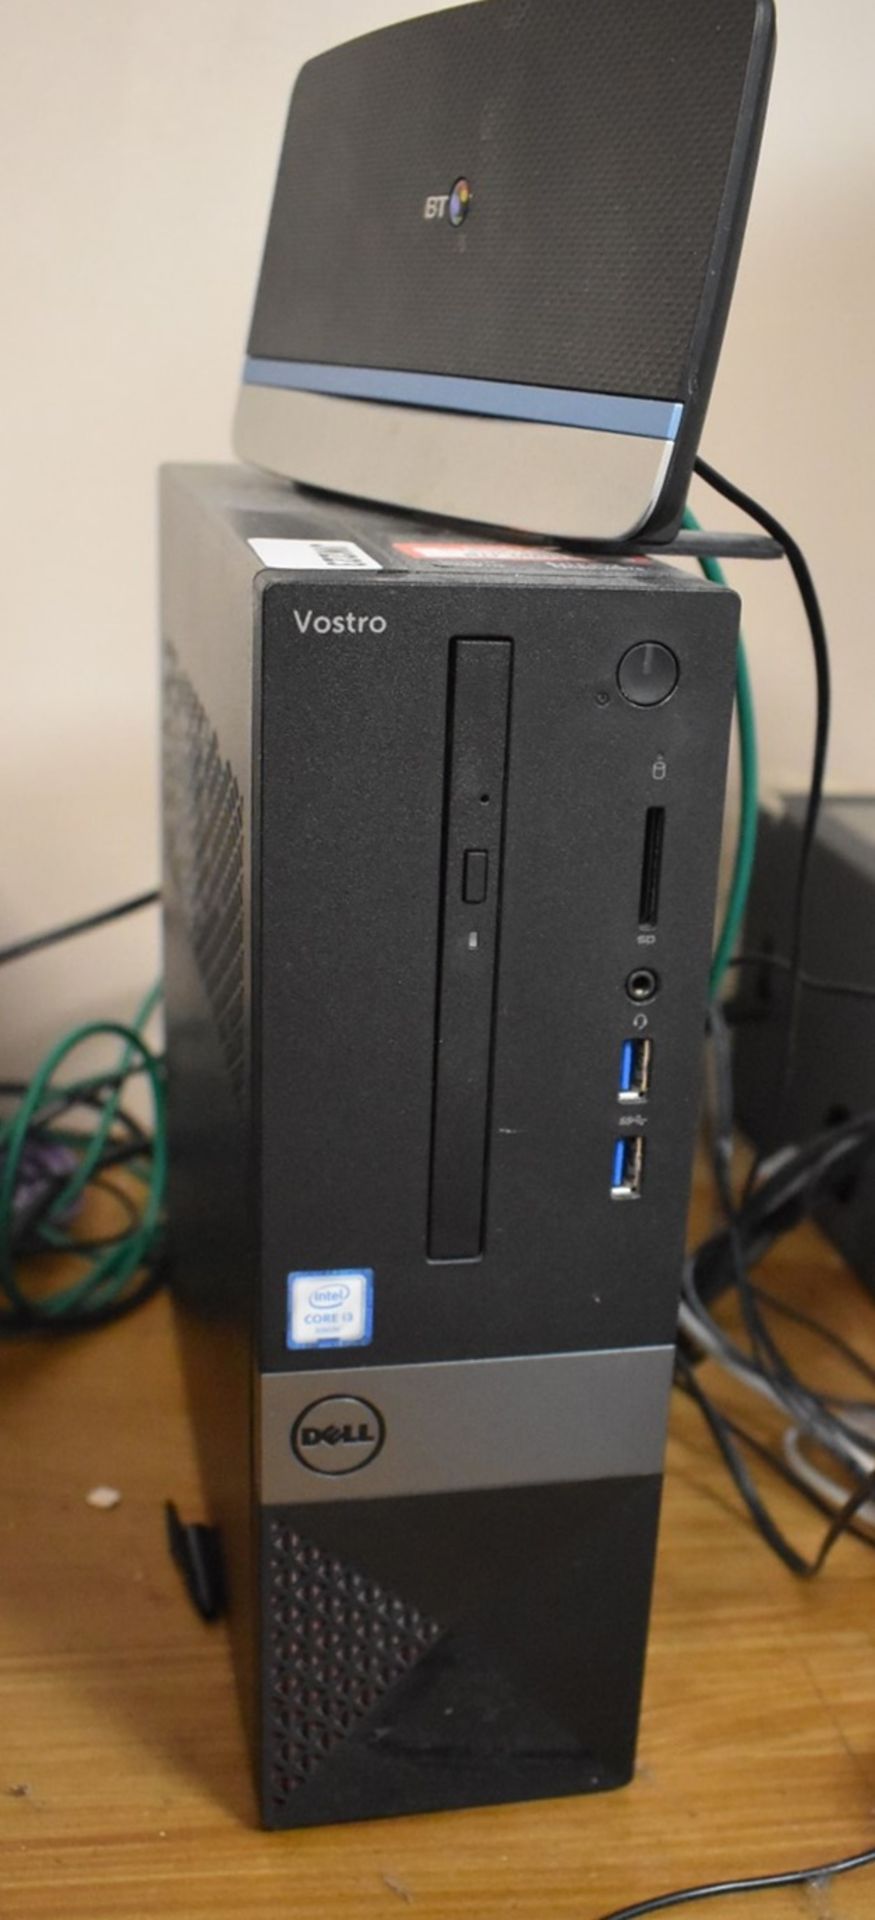 1 x Dell Vostro 3250 Small Form Factor PC With 6th Gen Intel i3 Processor and 4gb Ram - Hard Disk